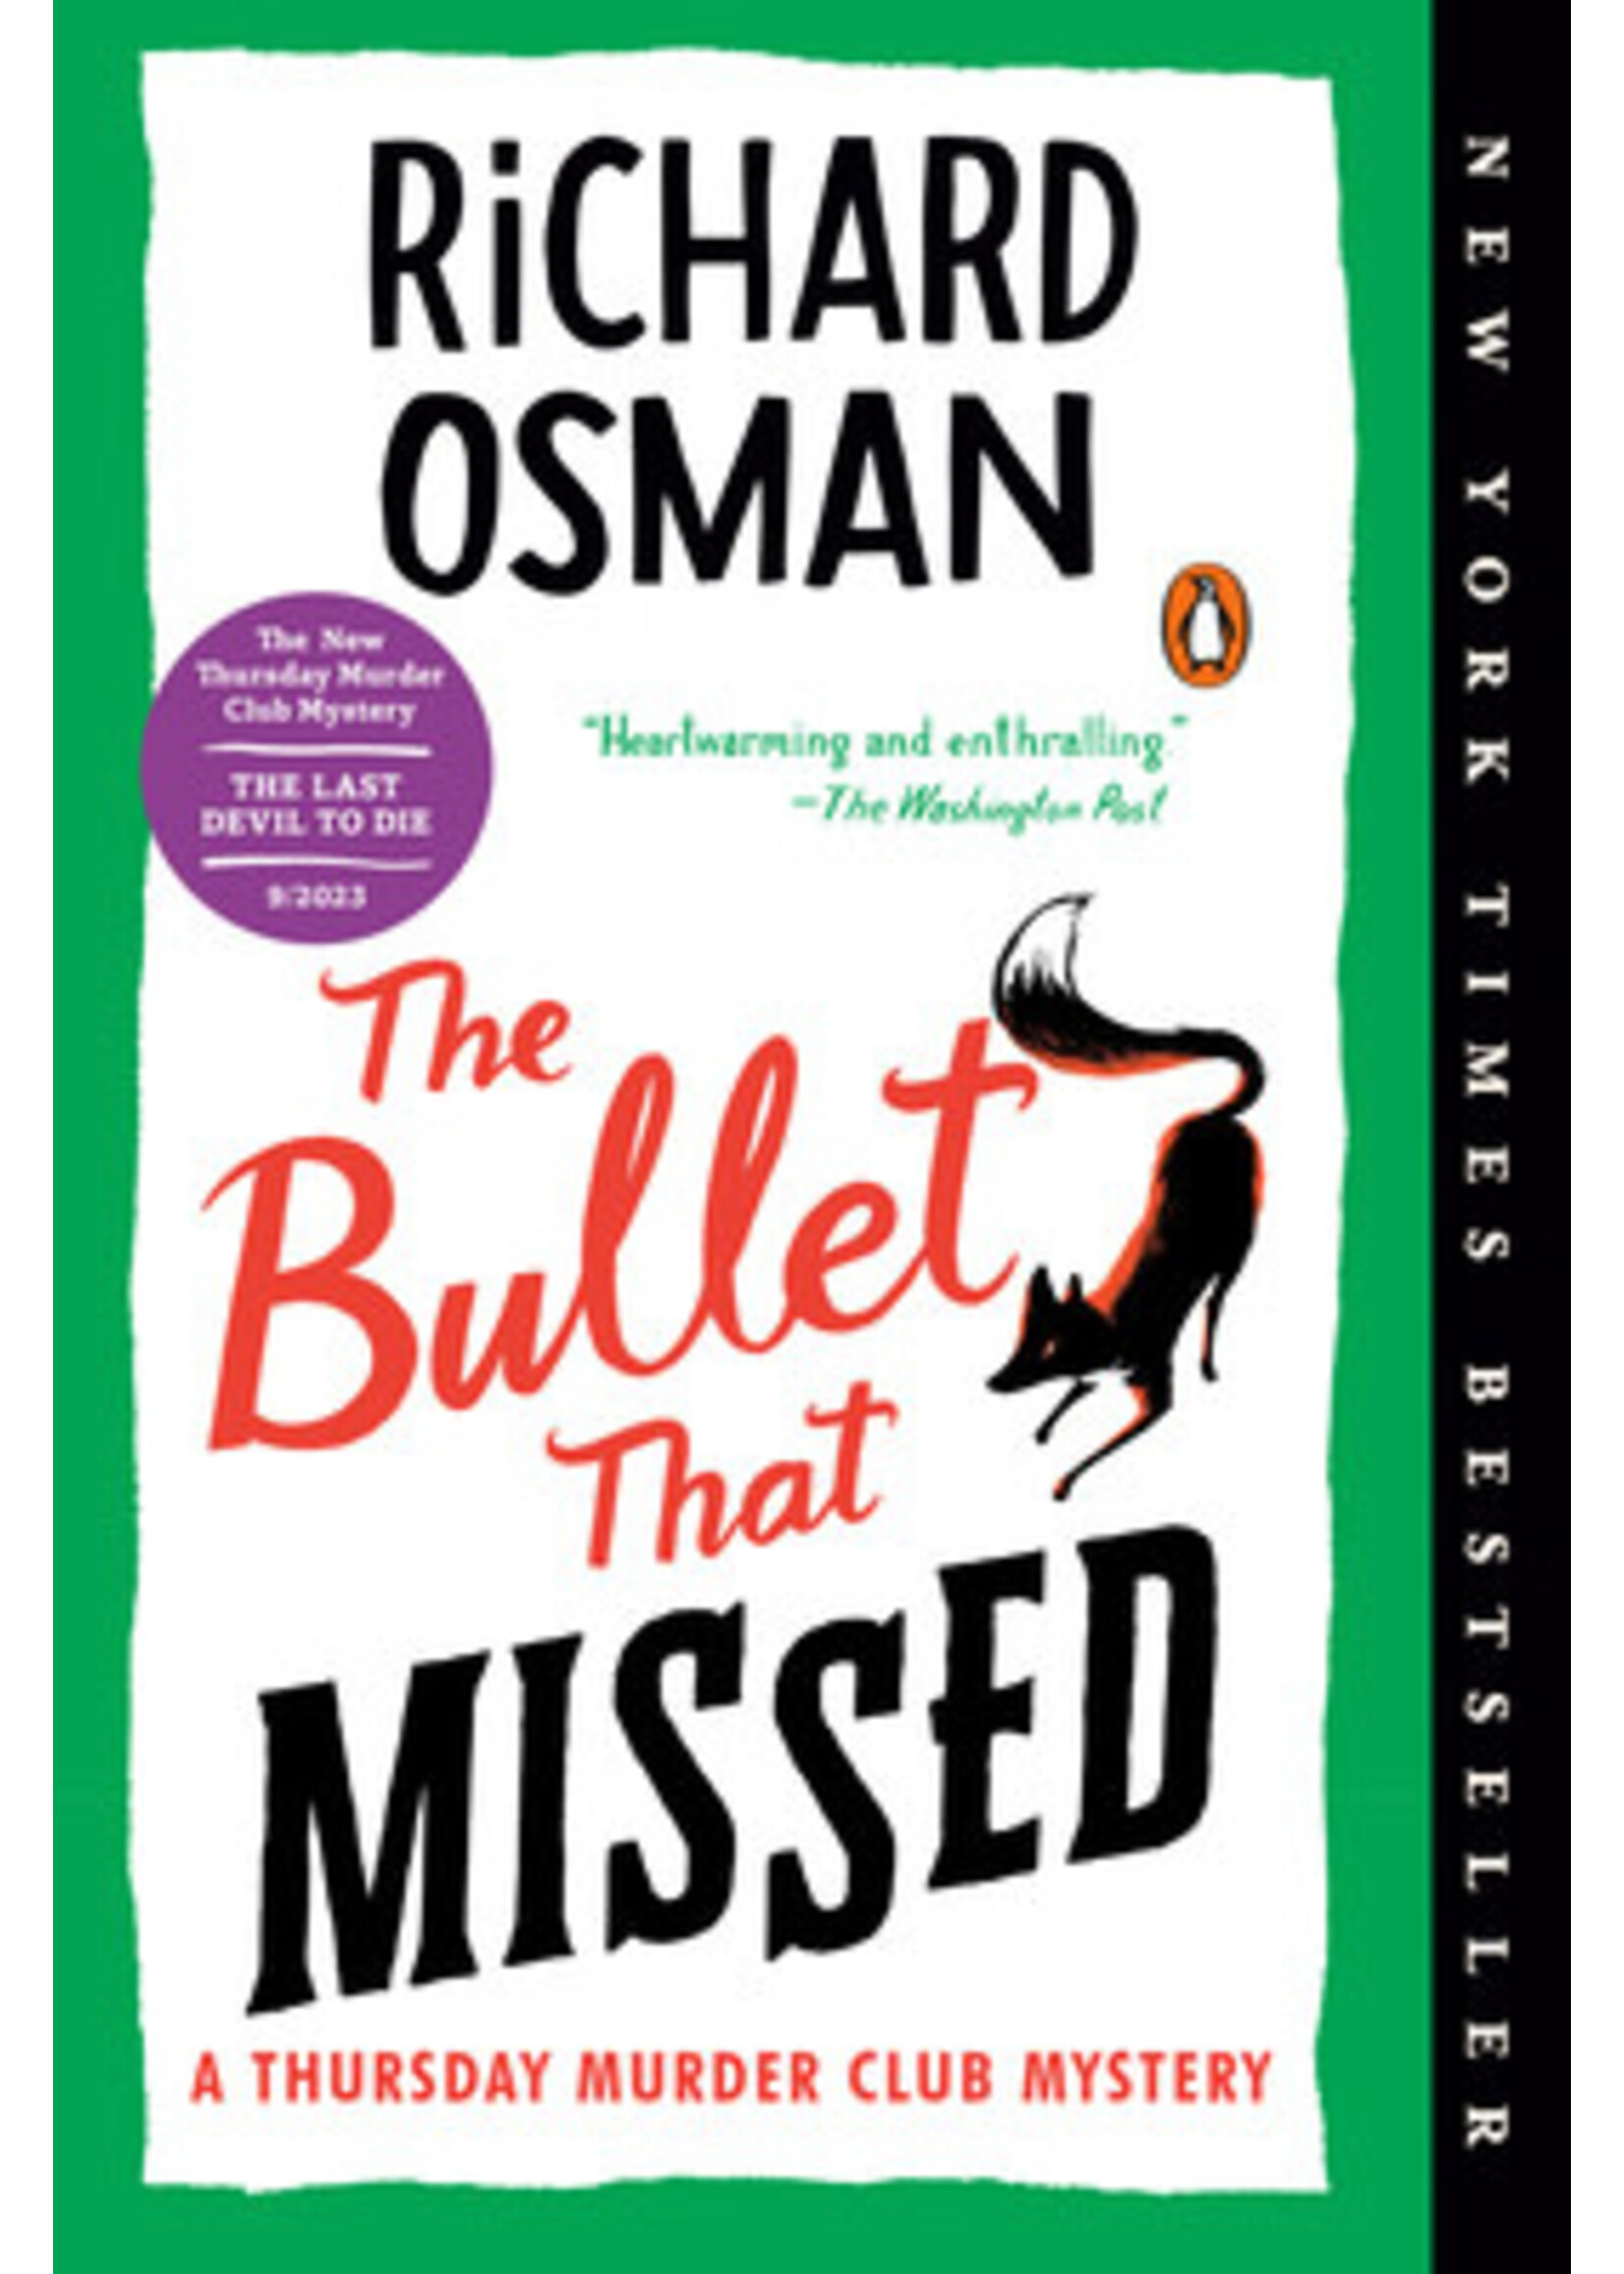 The Bullet That Missed (Thursday Murder Club #3) by Richard Osman